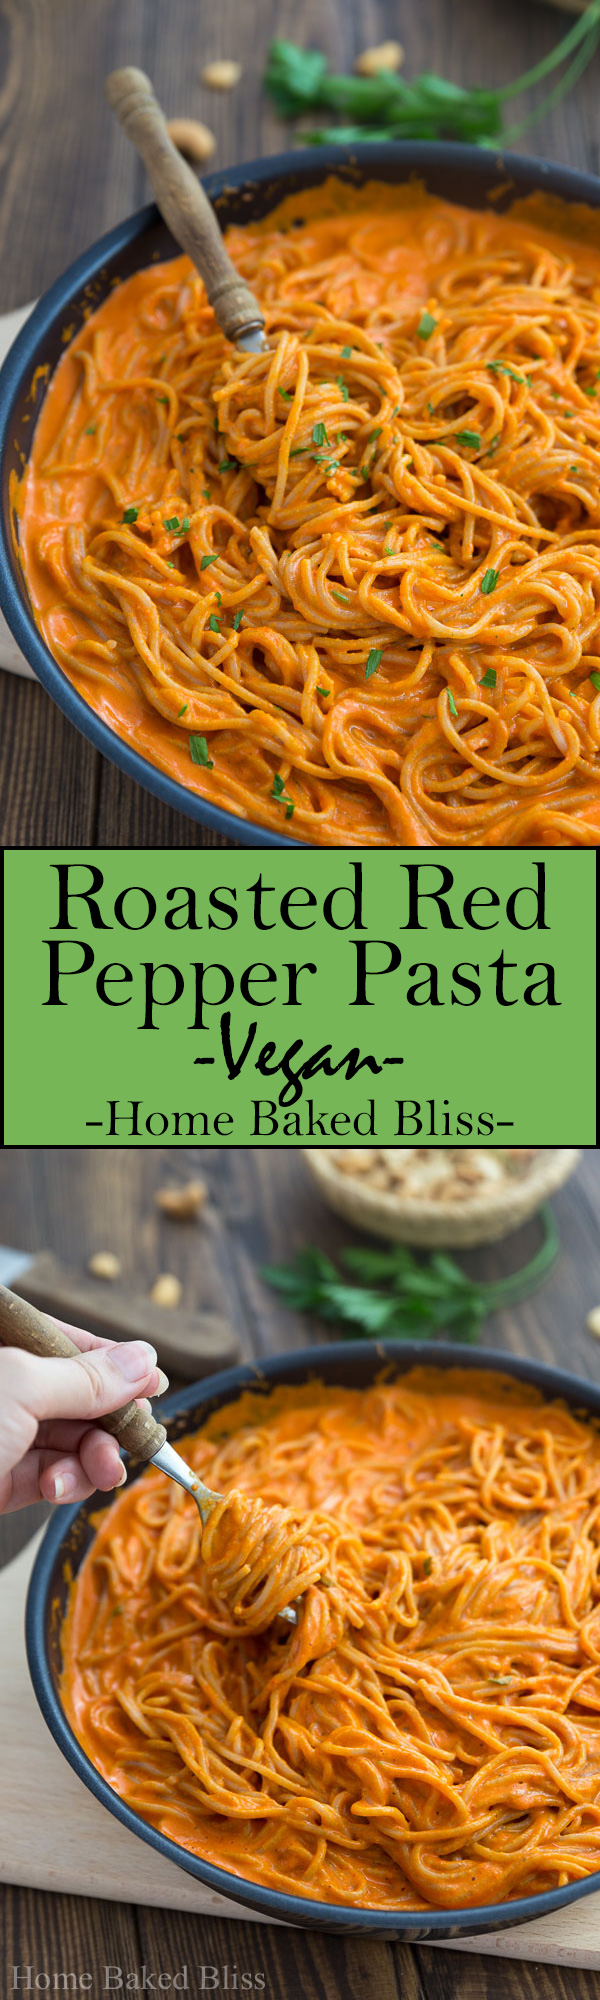 This roasted red bell pepper pasta is a quick and healthy vegan dinner you can make in a little over 30 minutes. #vegan #pasta #dinner #healthy | homebakedbliss.com